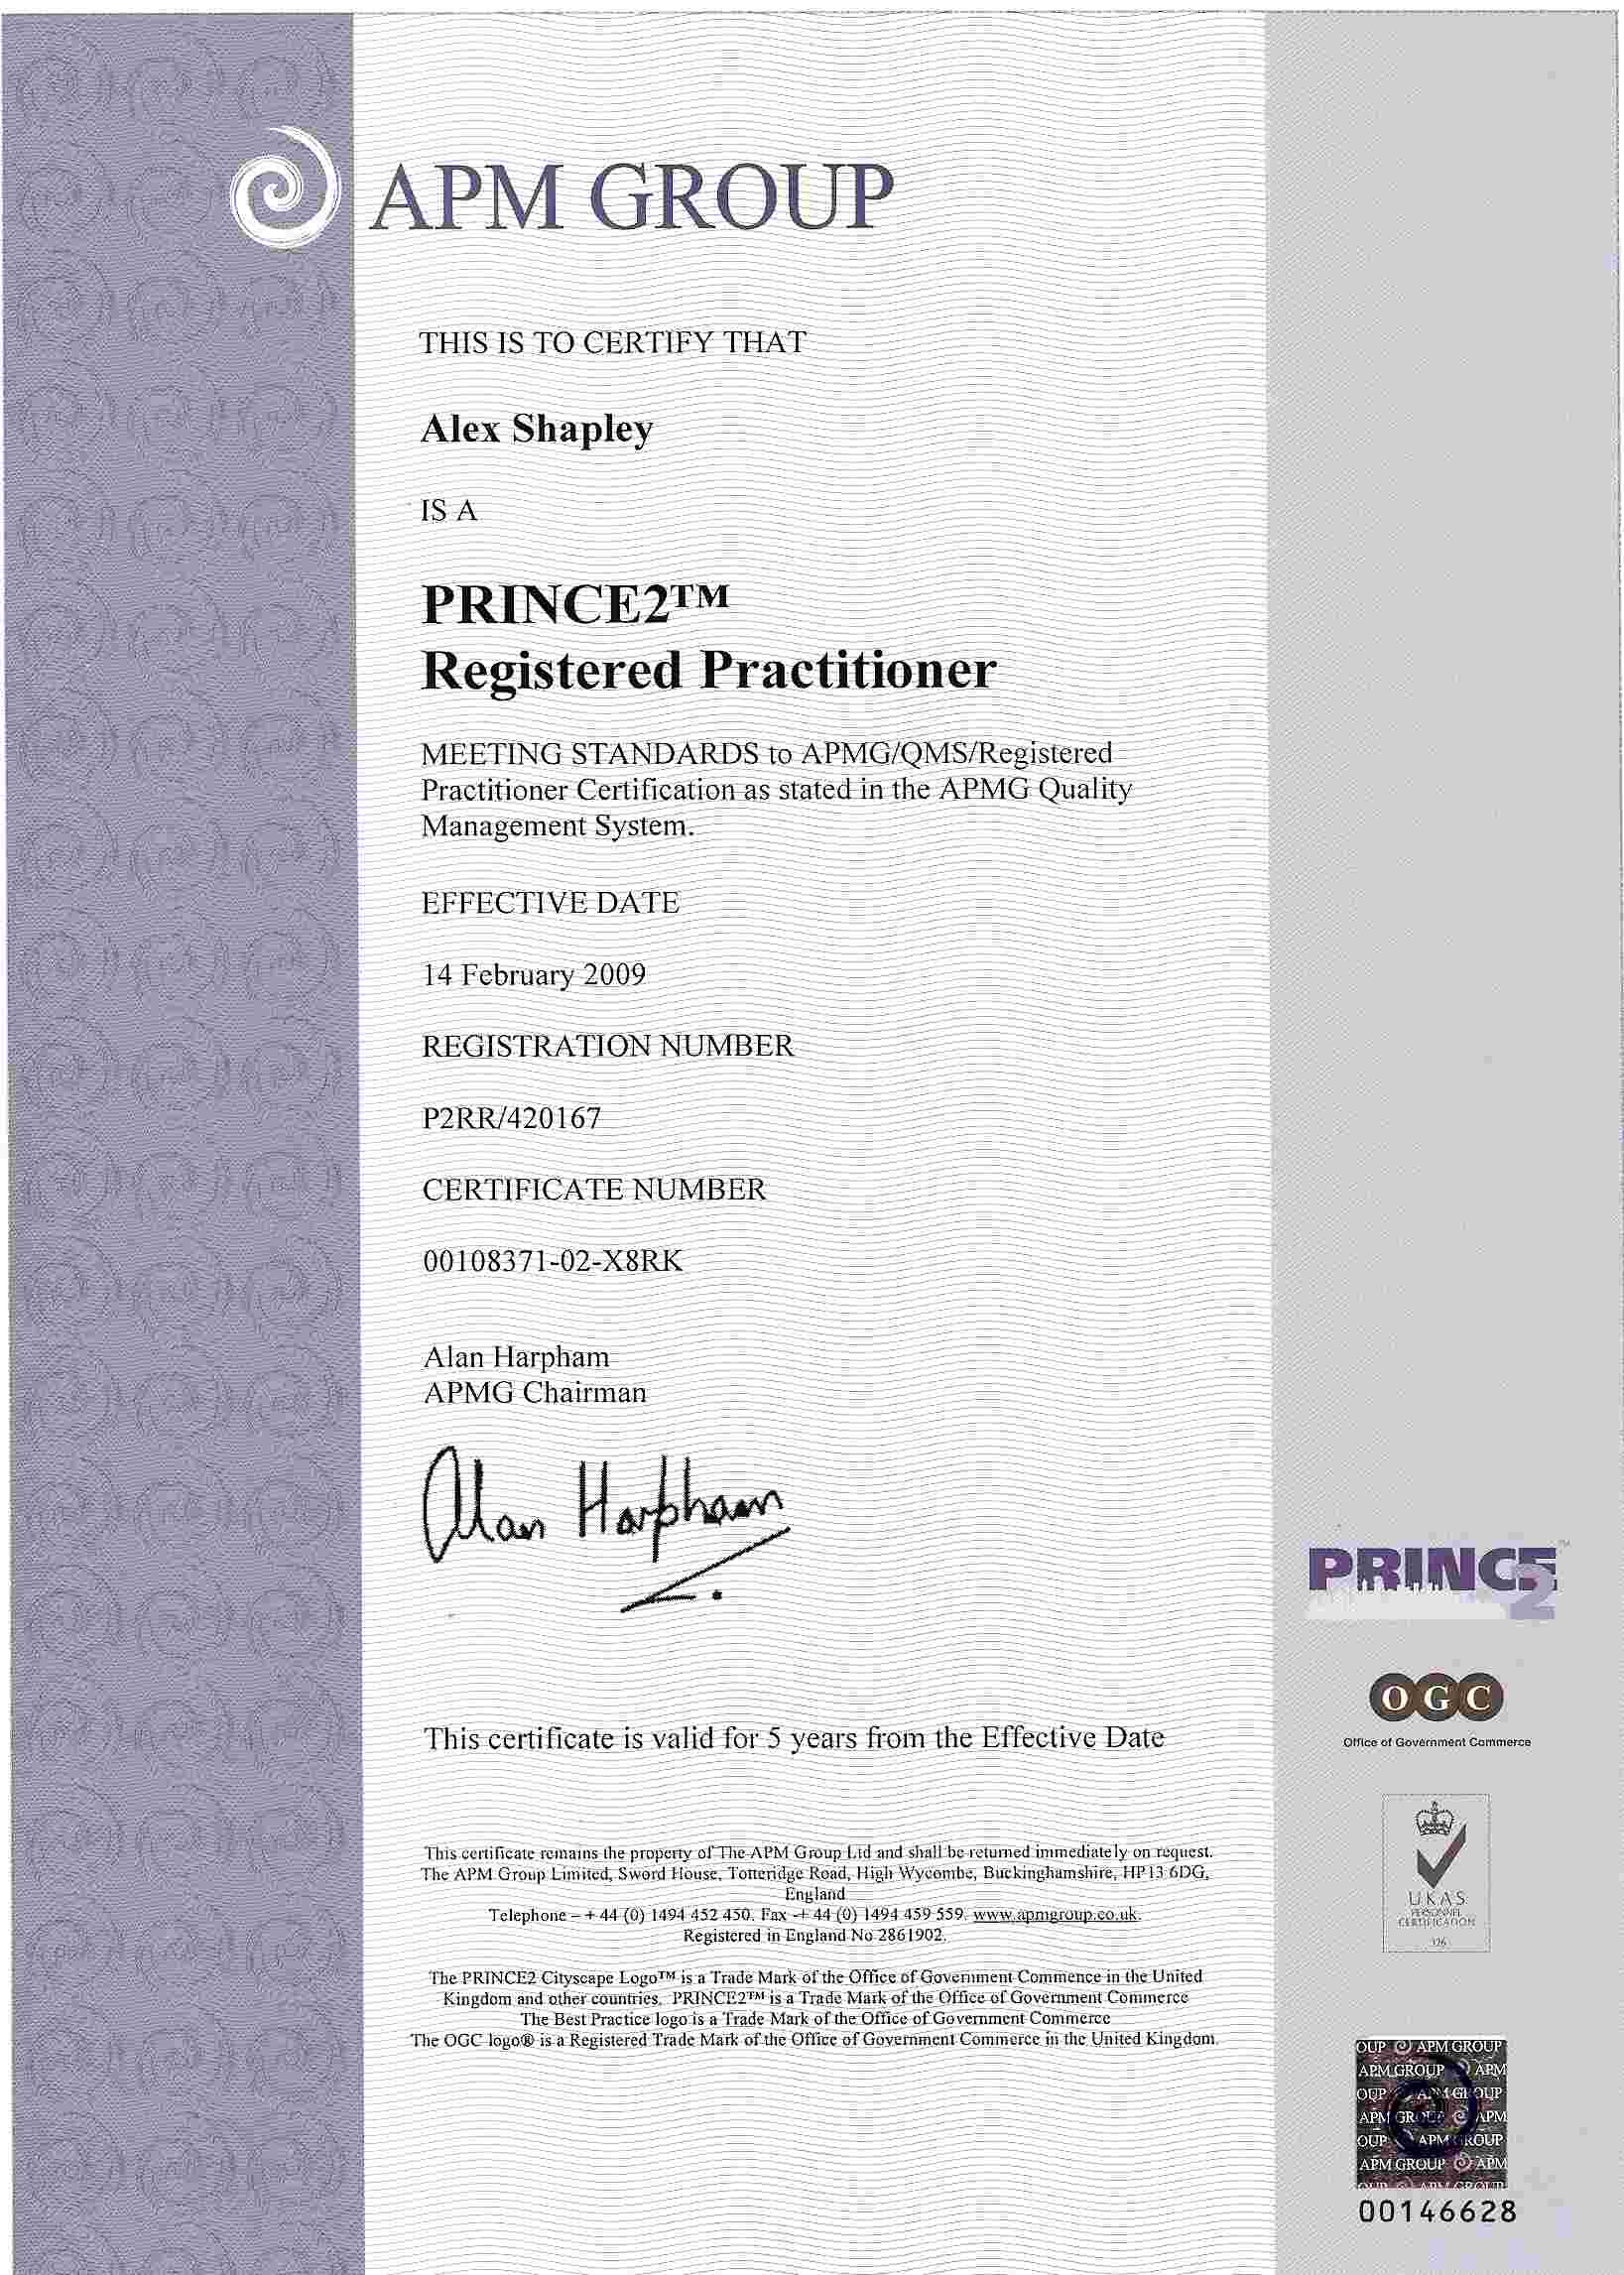 Prince2 Practitioner